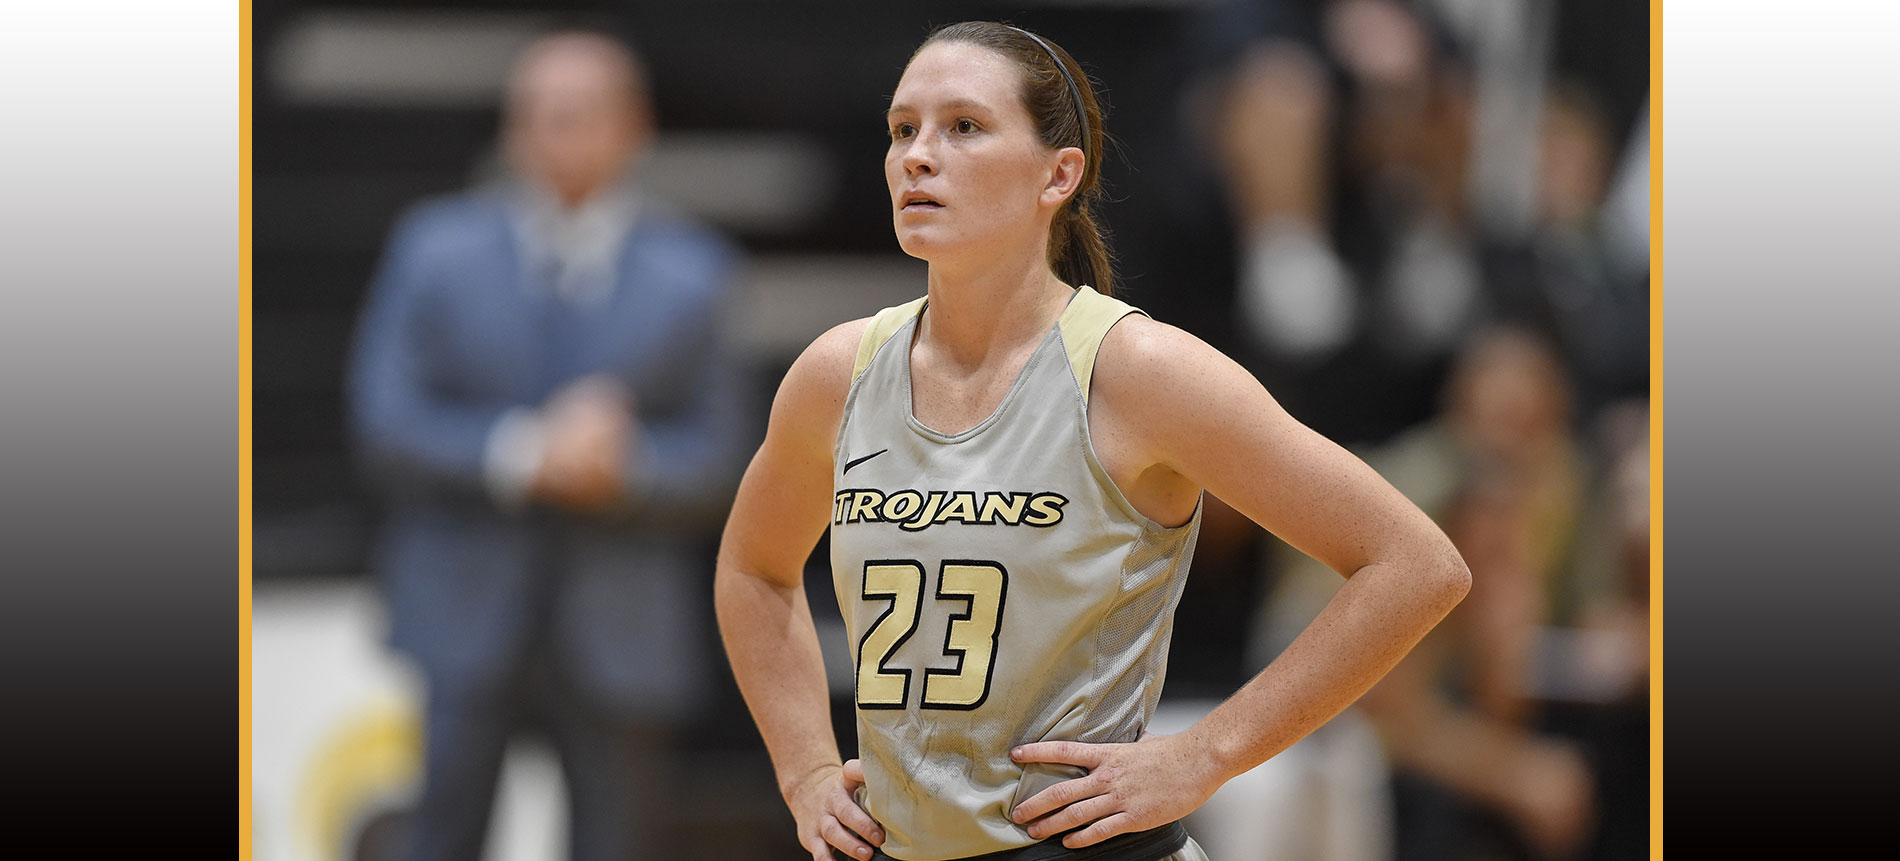 Women’s Basketball Garners Recognition in National Polls